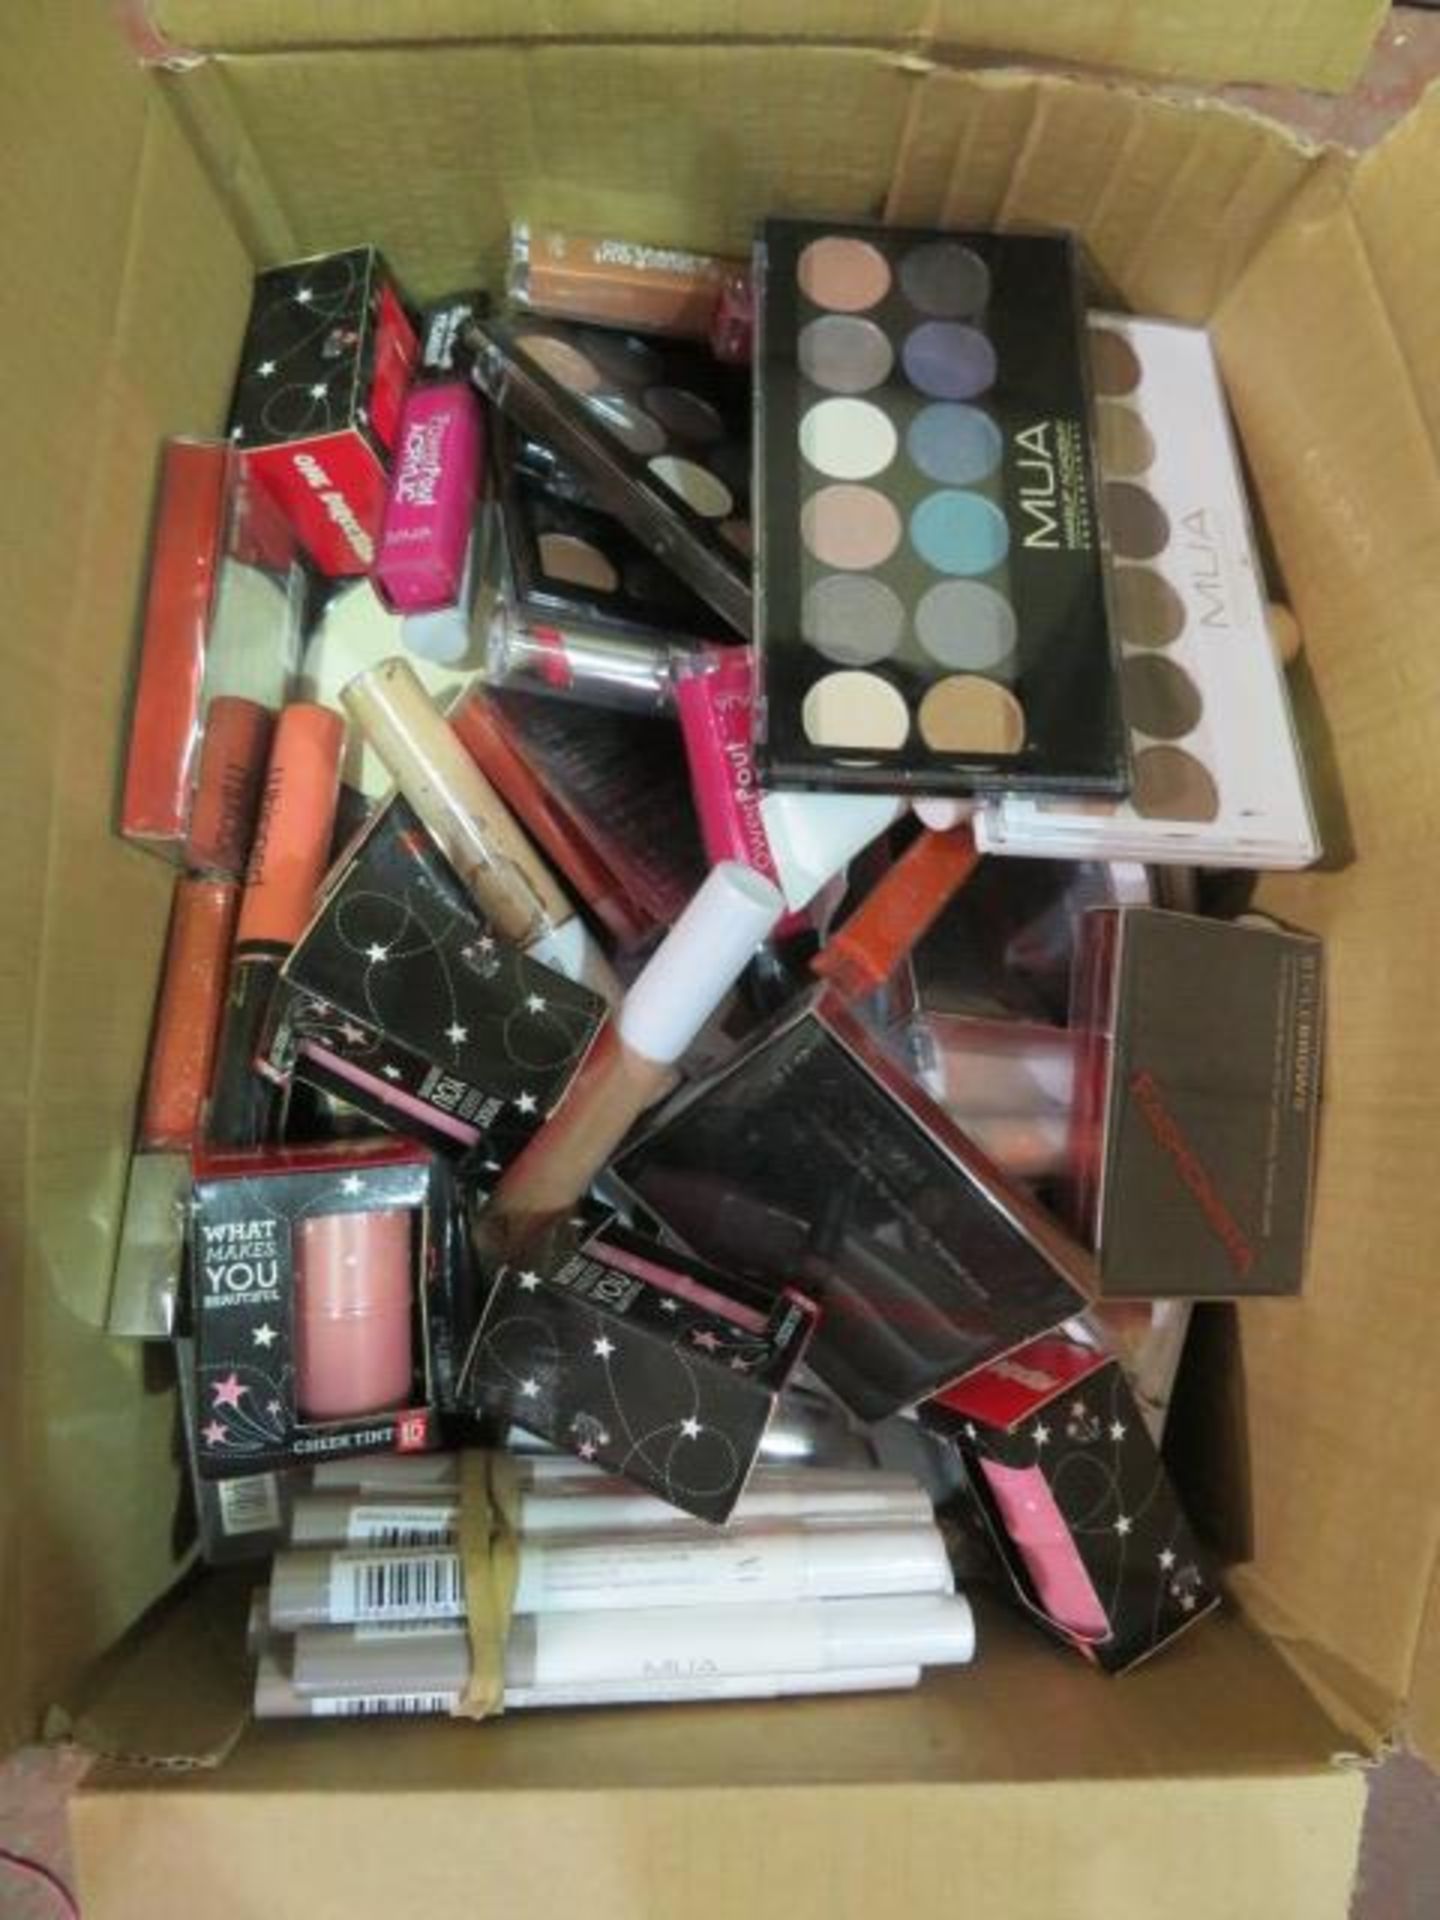 Circa. 200 items of various new make up acadamy make up to include: radiant under eye concealer...